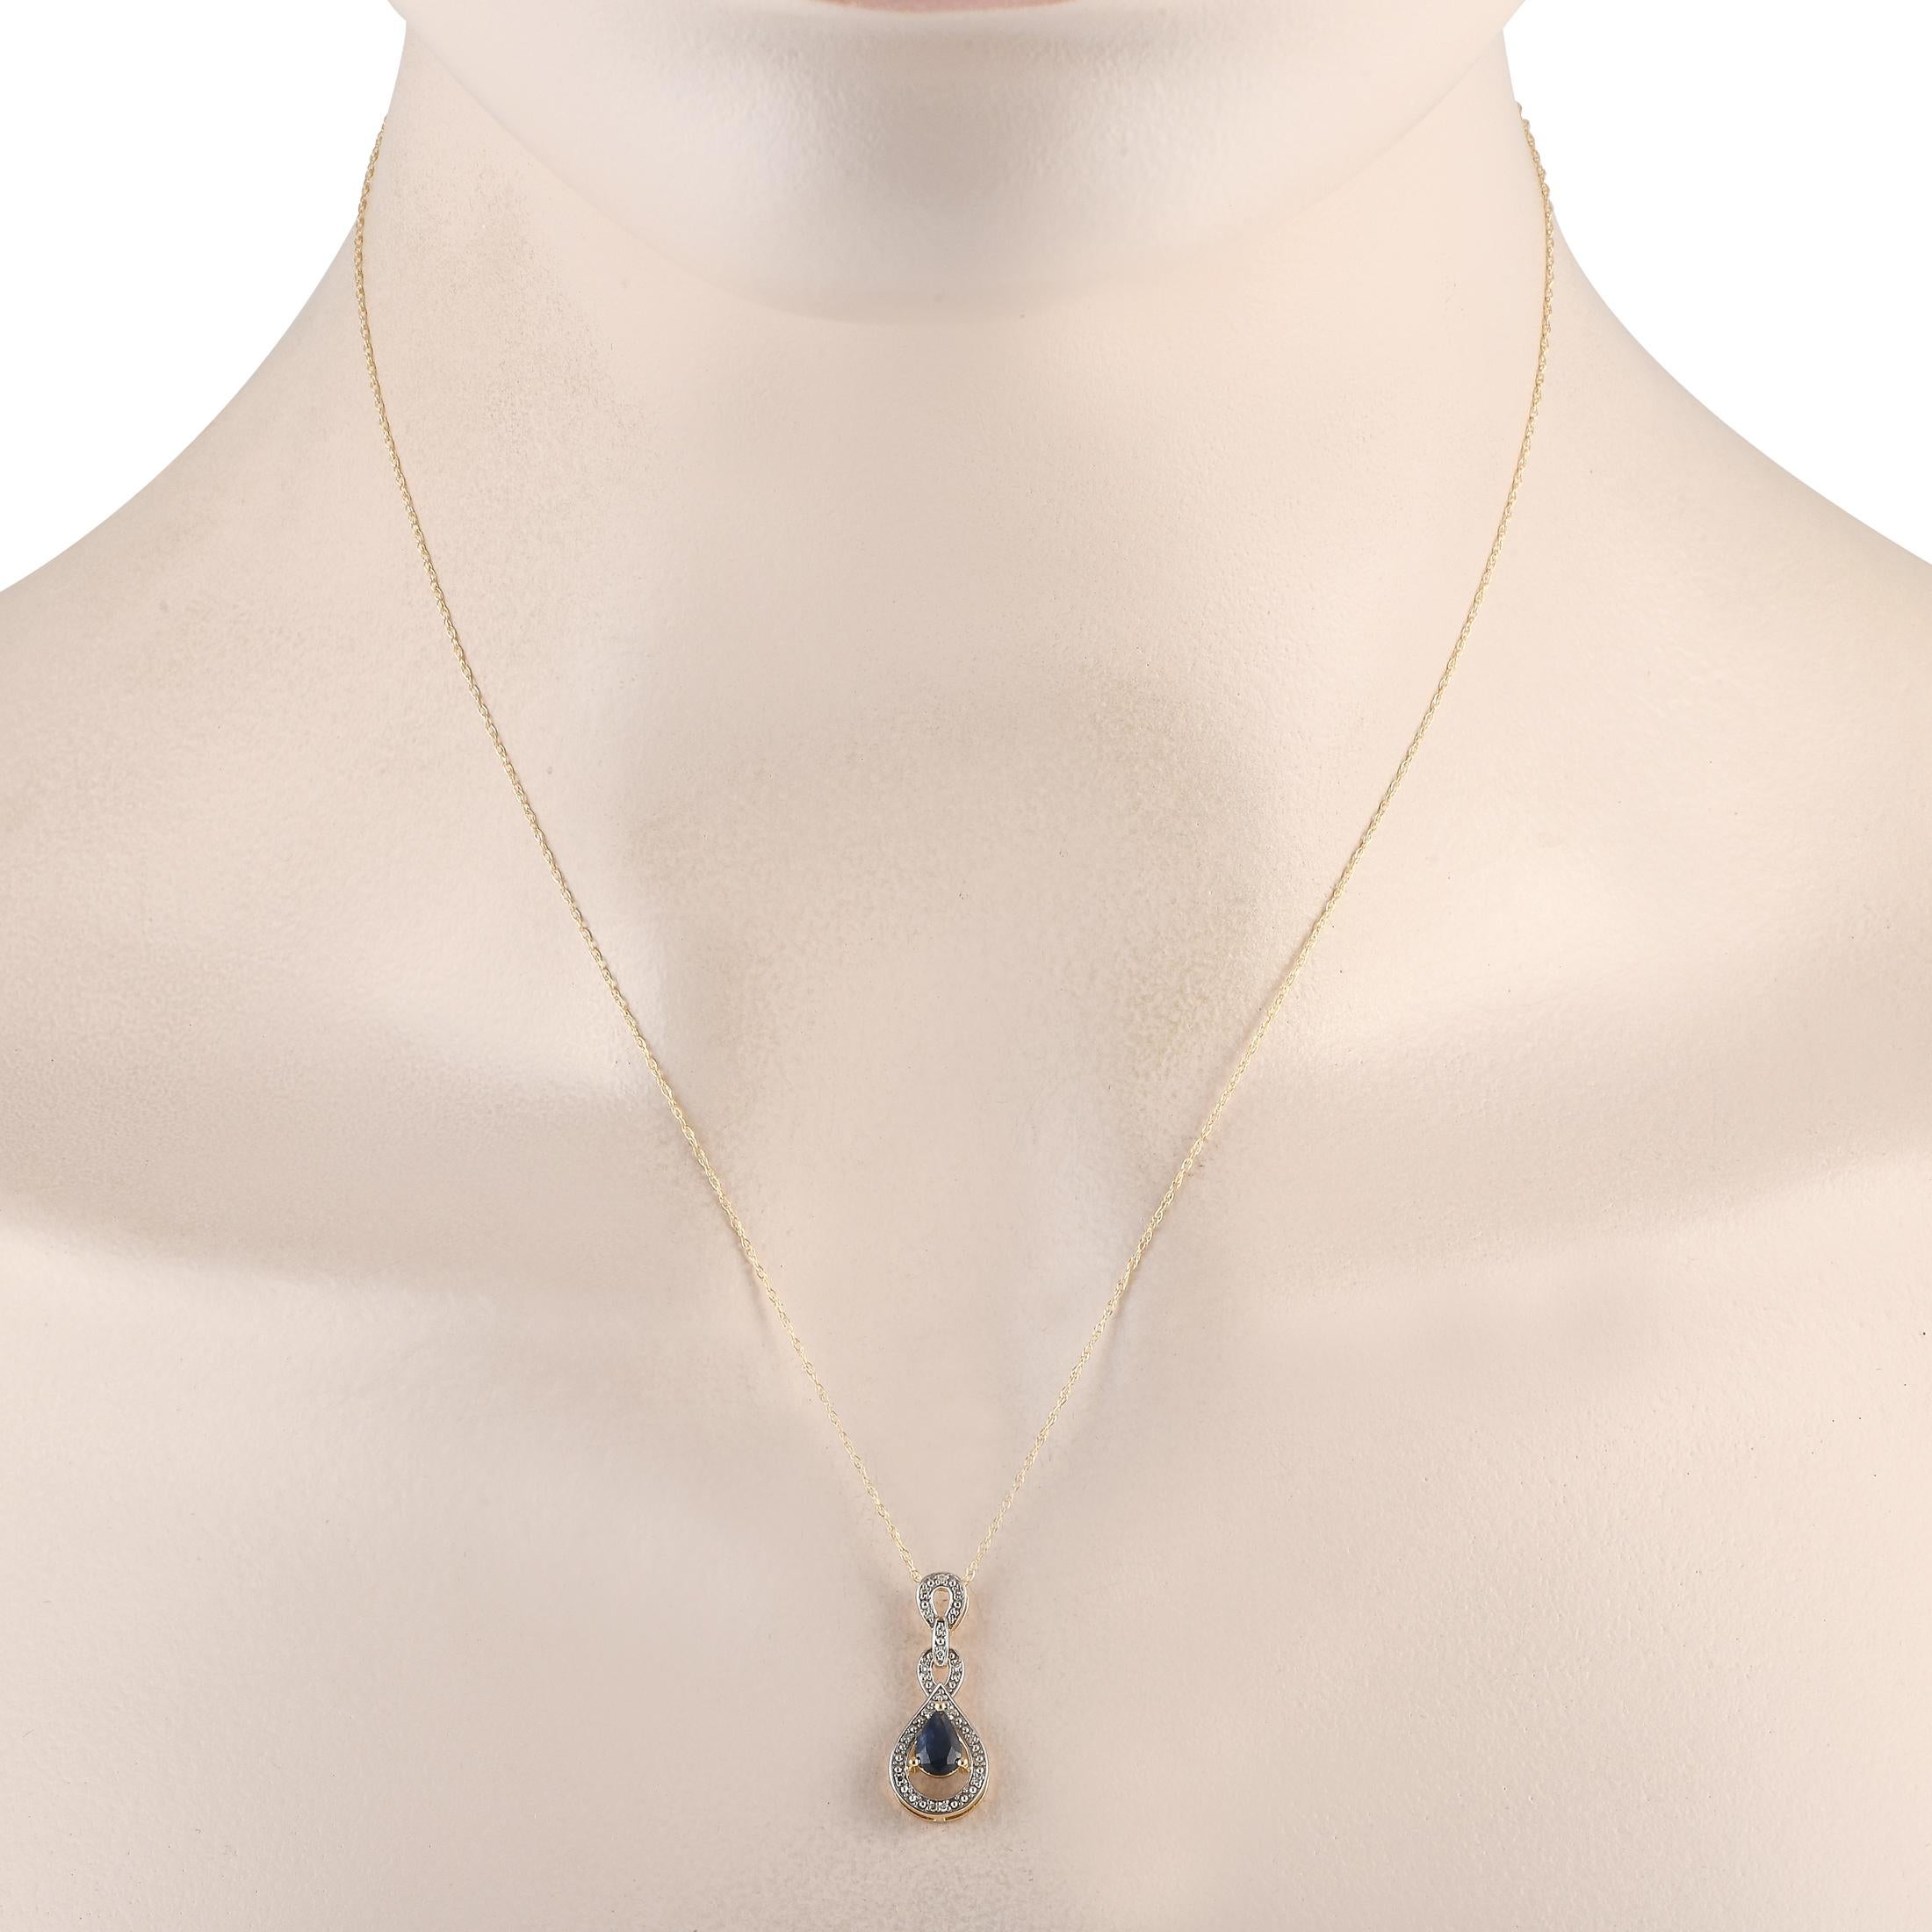 Exuding poise and grace, this yellow gold necklace will instantly elevate your style. Its diamond-traced pendant features openwork links. The largest link bears a pear-shaped silhouette punctuated by a faceted pear sapphire at the center. This